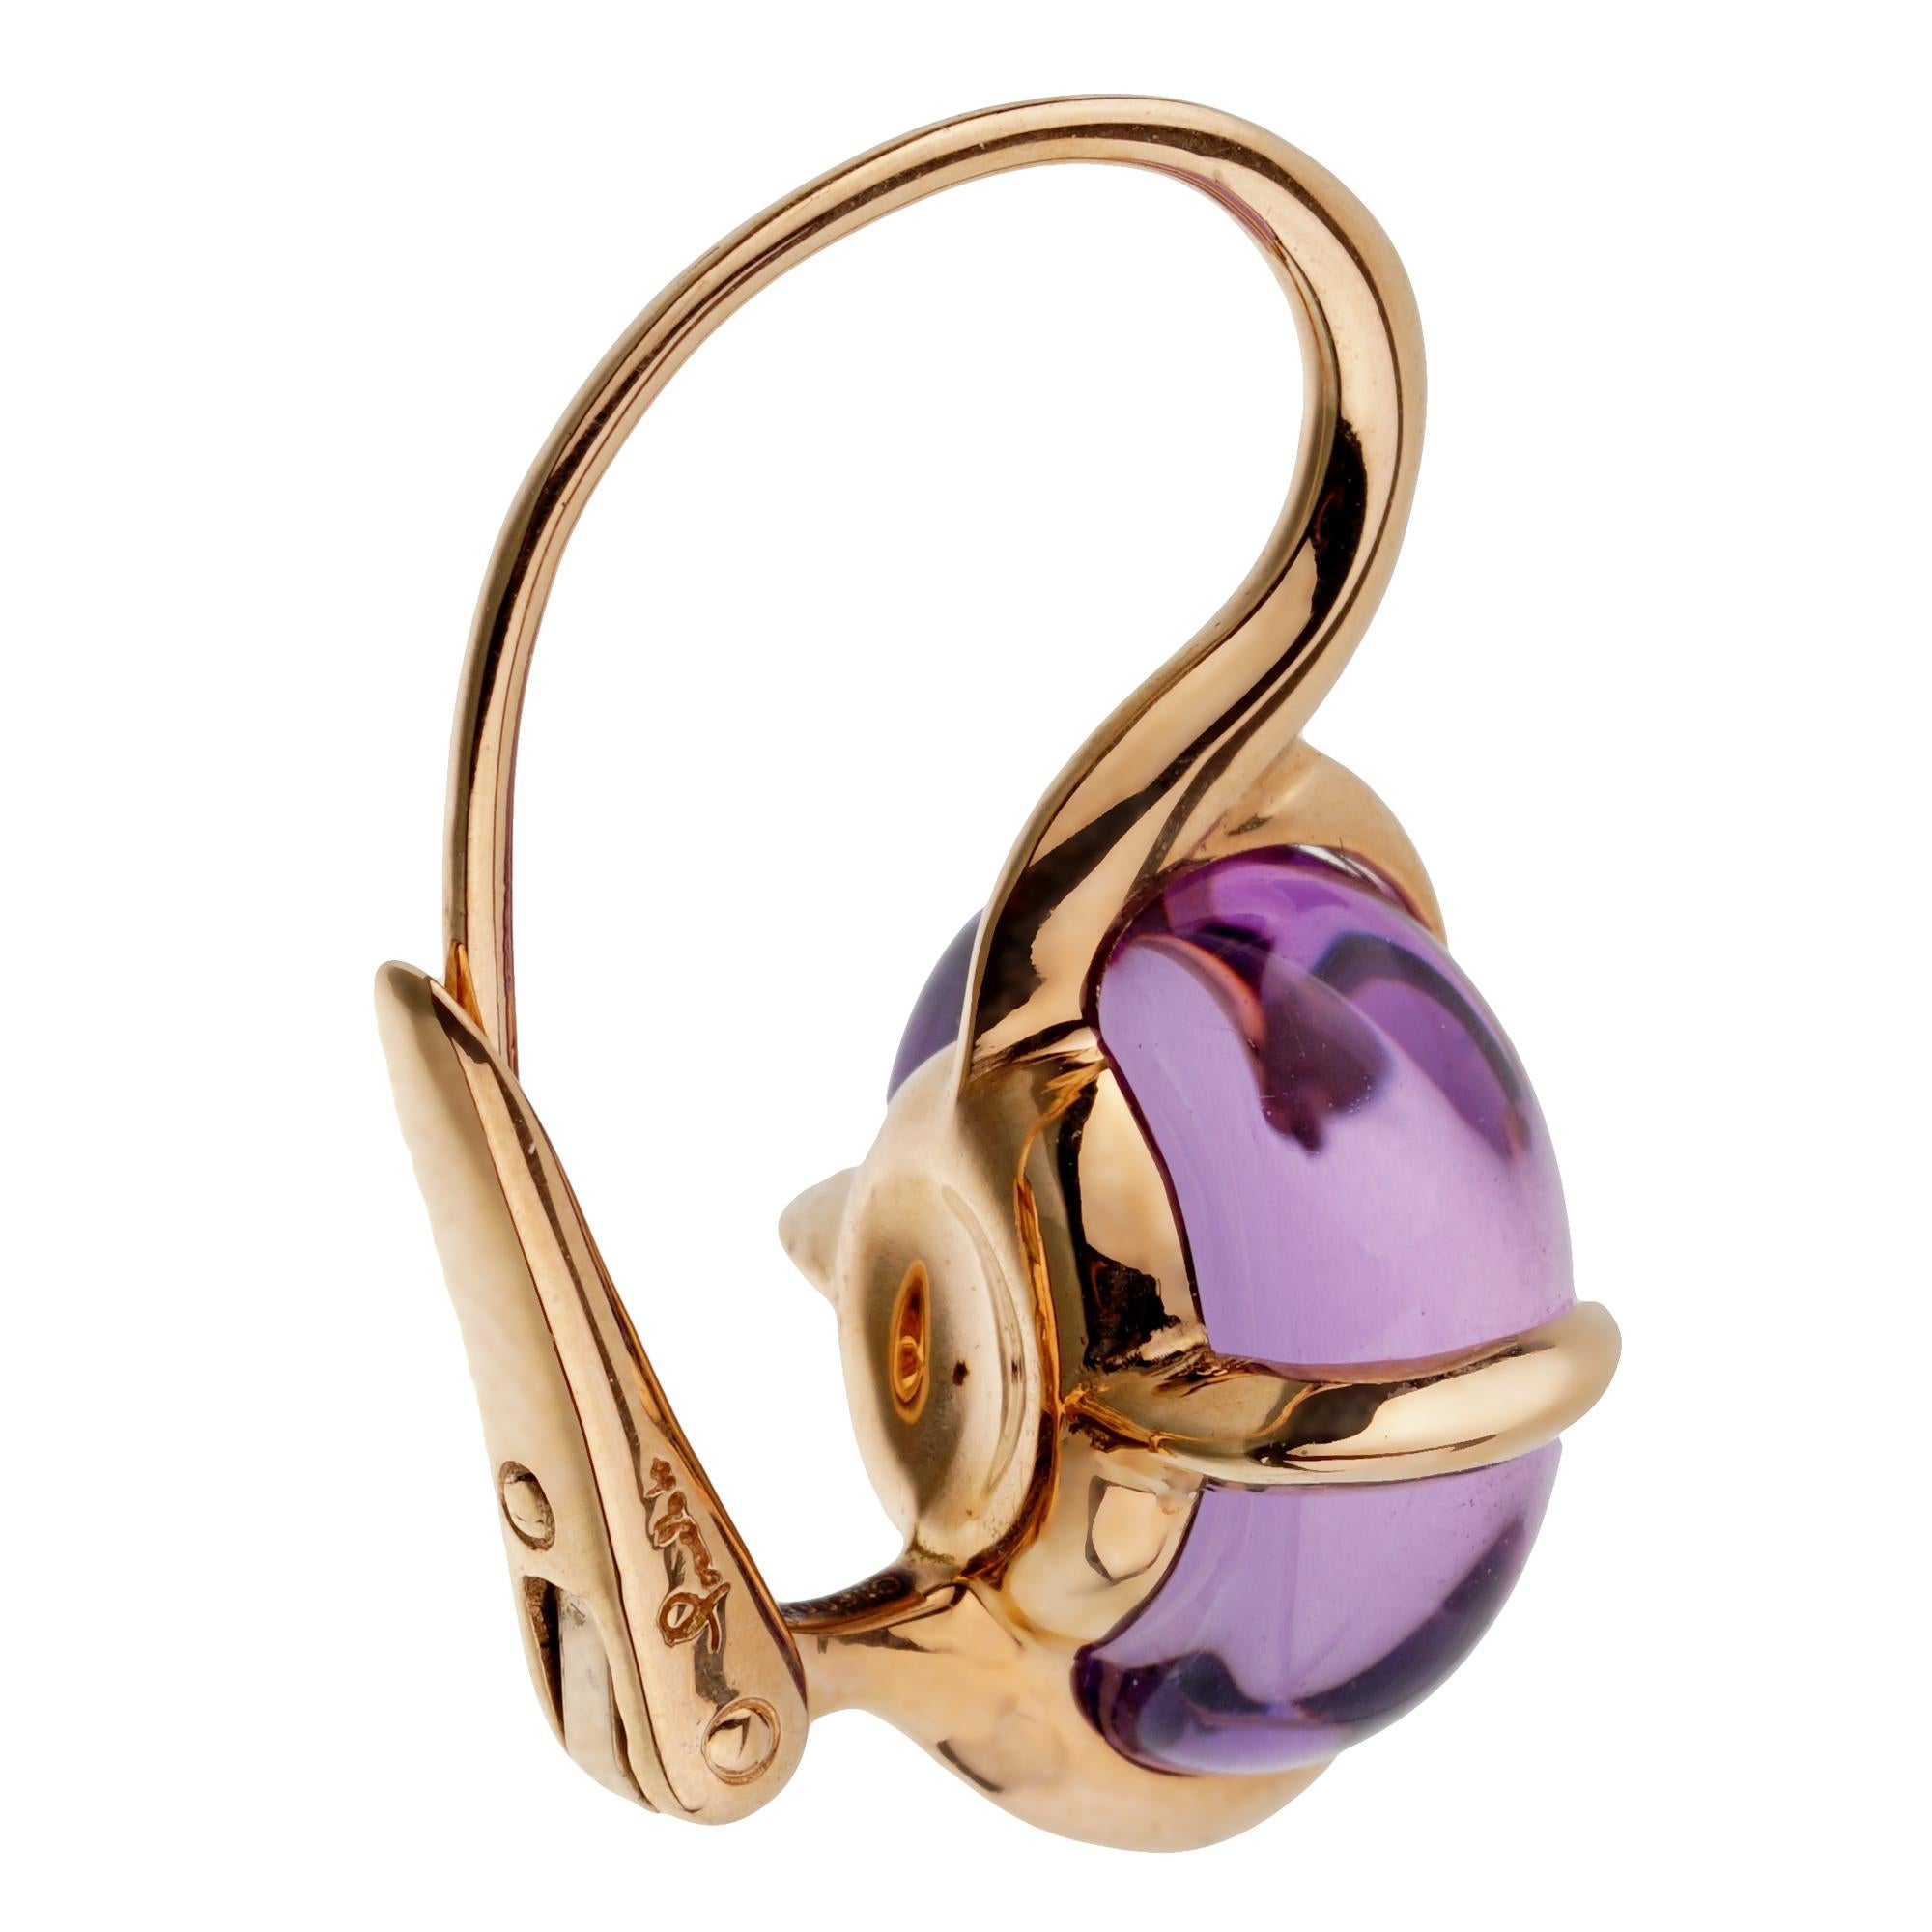 A fabulous pair of authentic Pomellato earrings showcasing 2 cabochon amethyst's weighing 16.60ct total weight in shimmering 18k rose gold. The earrings have a length of 1